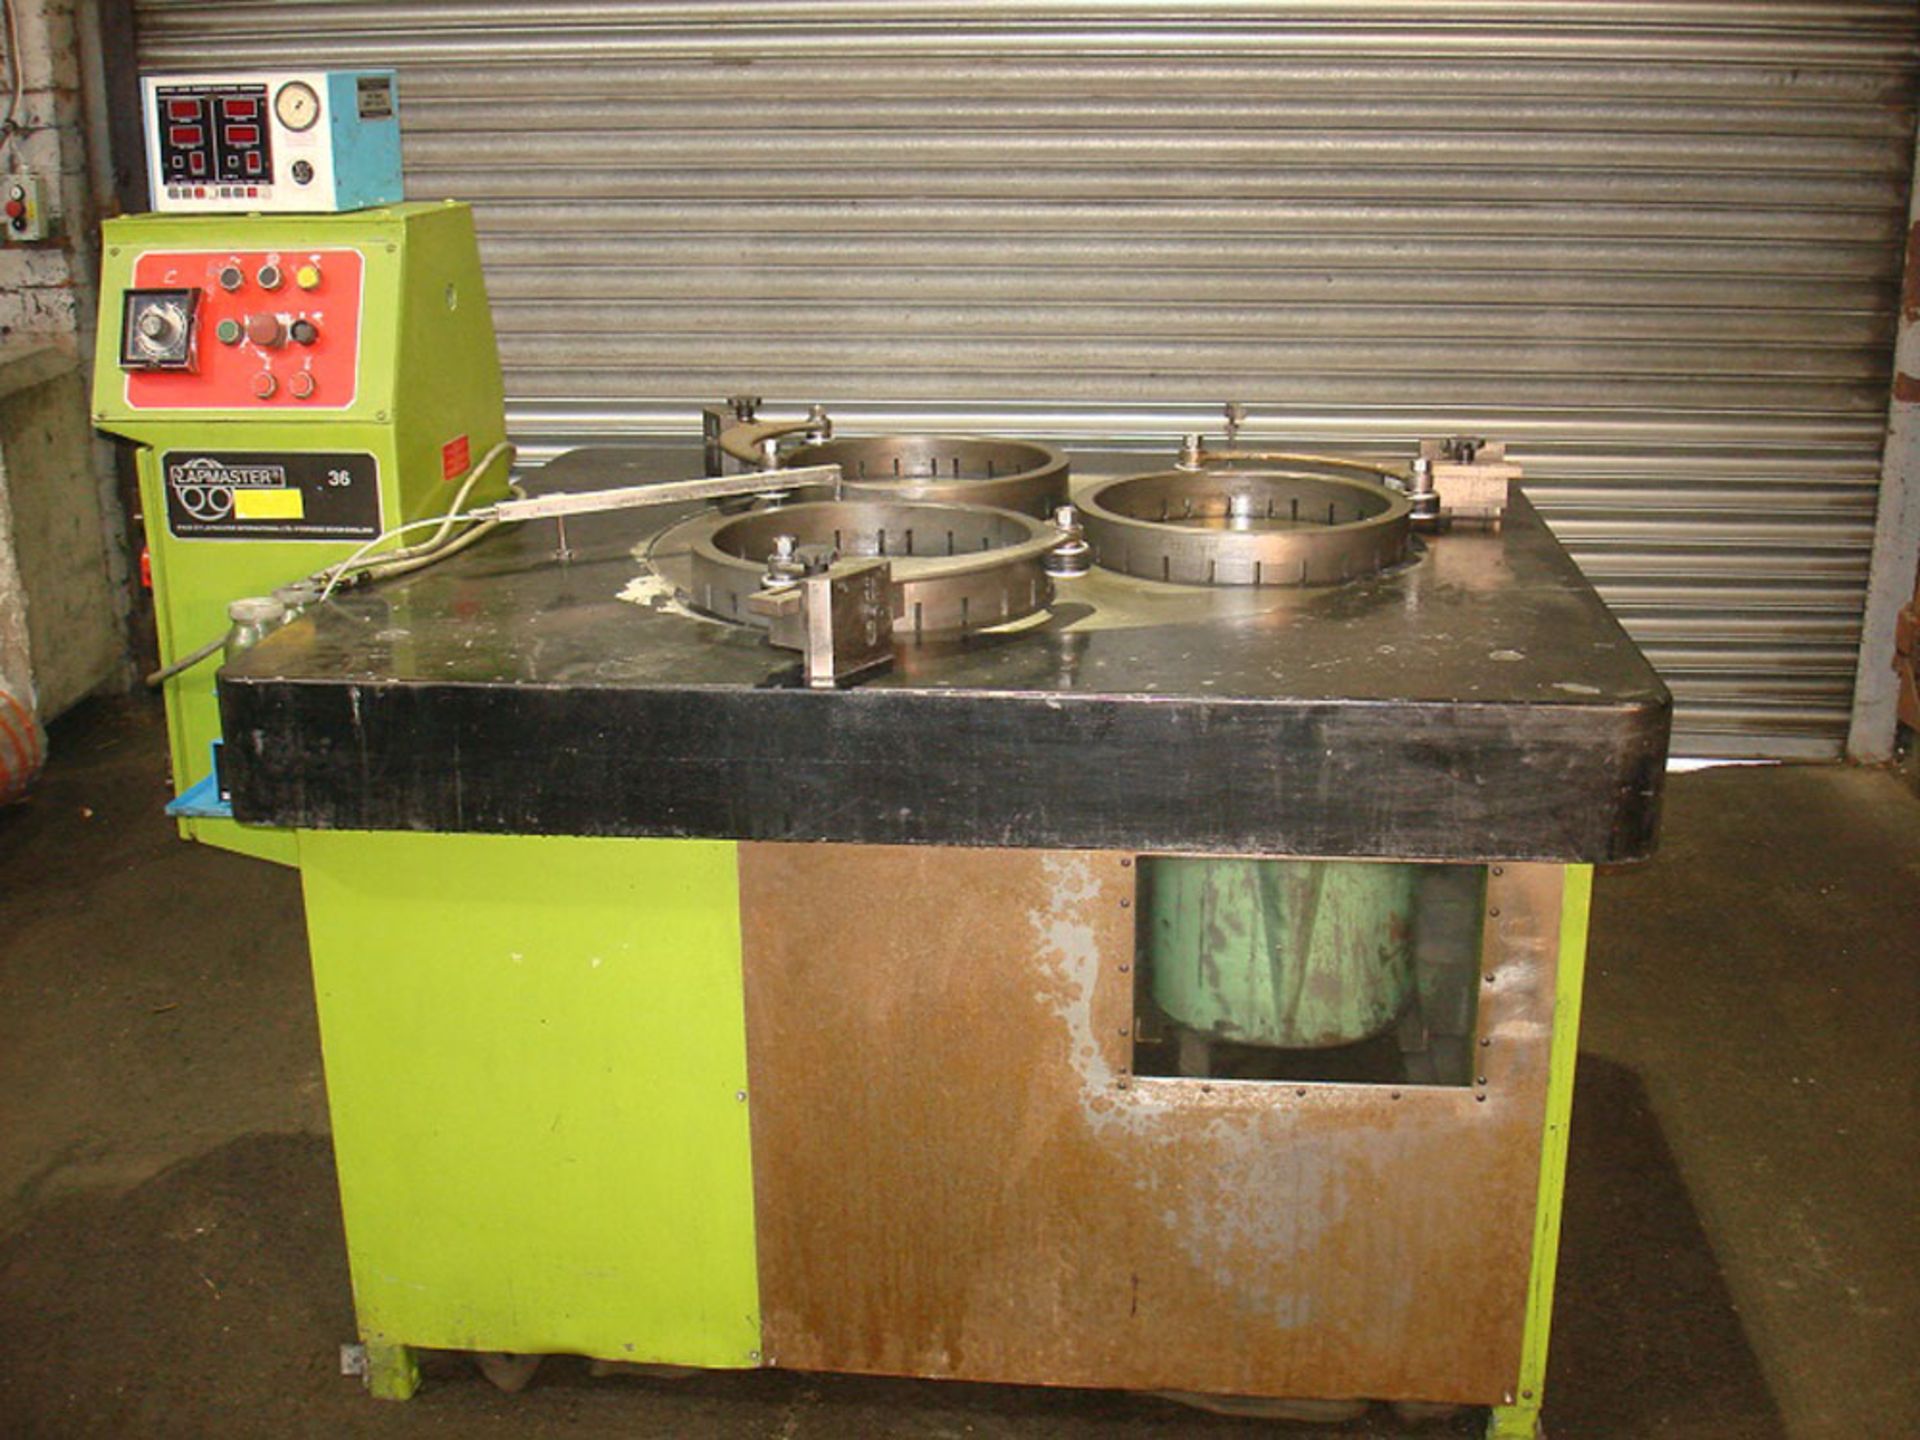 Lapmaster 36" Lapping Machine. With Rings and Diamond Fluid Dispenser.